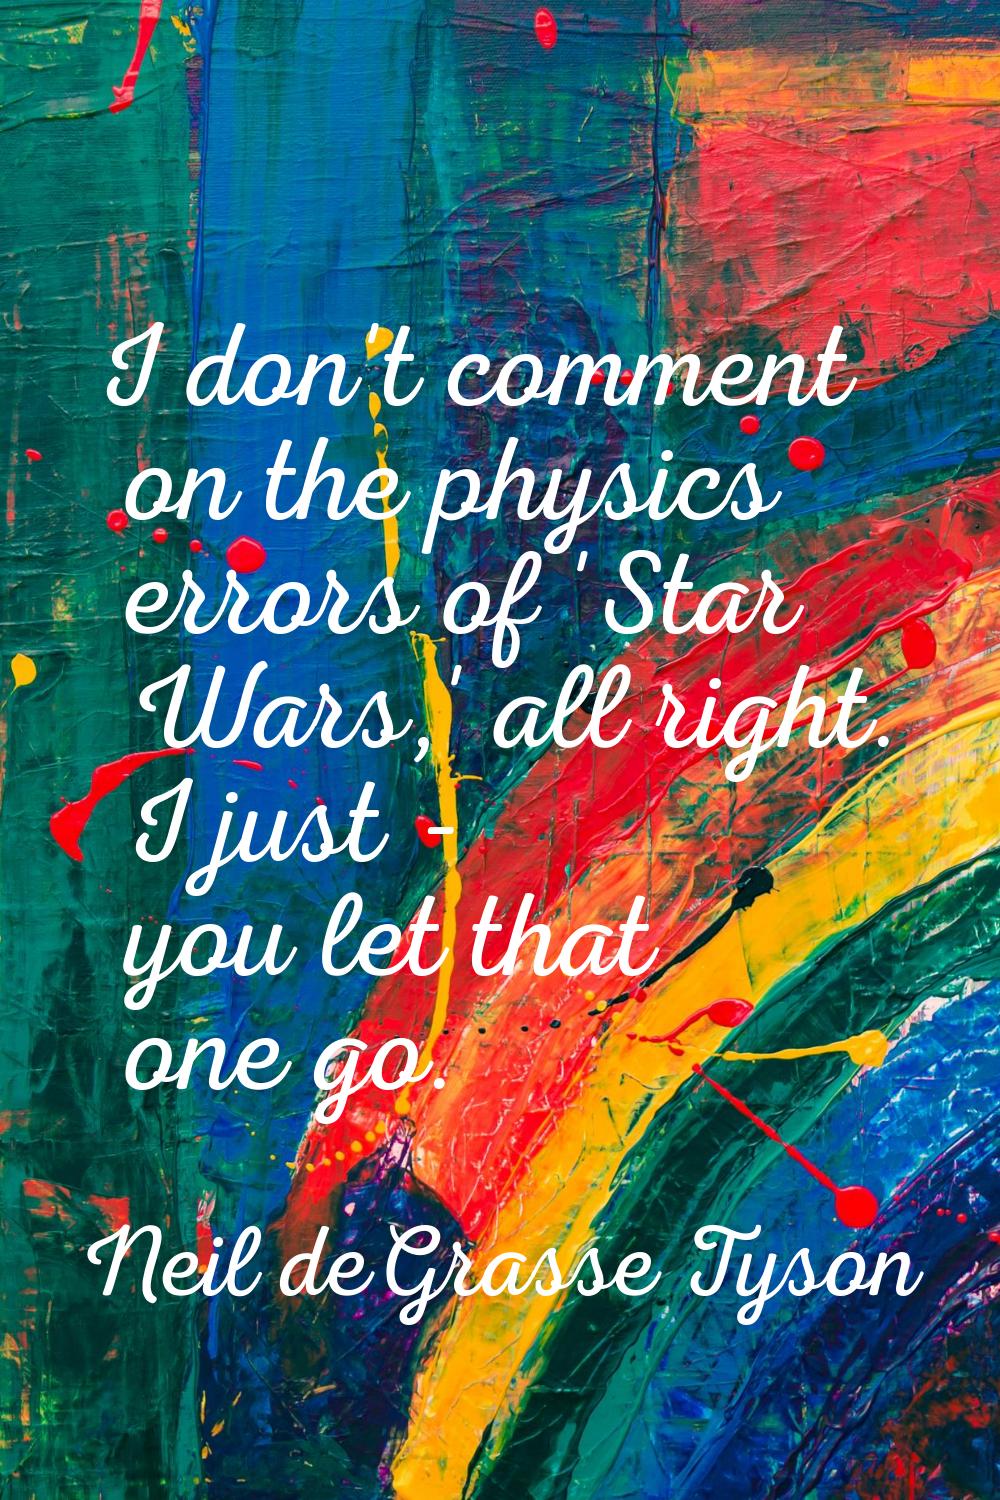 I don't comment on the physics errors of 'Star Wars,' all right. I just - you let that one go.